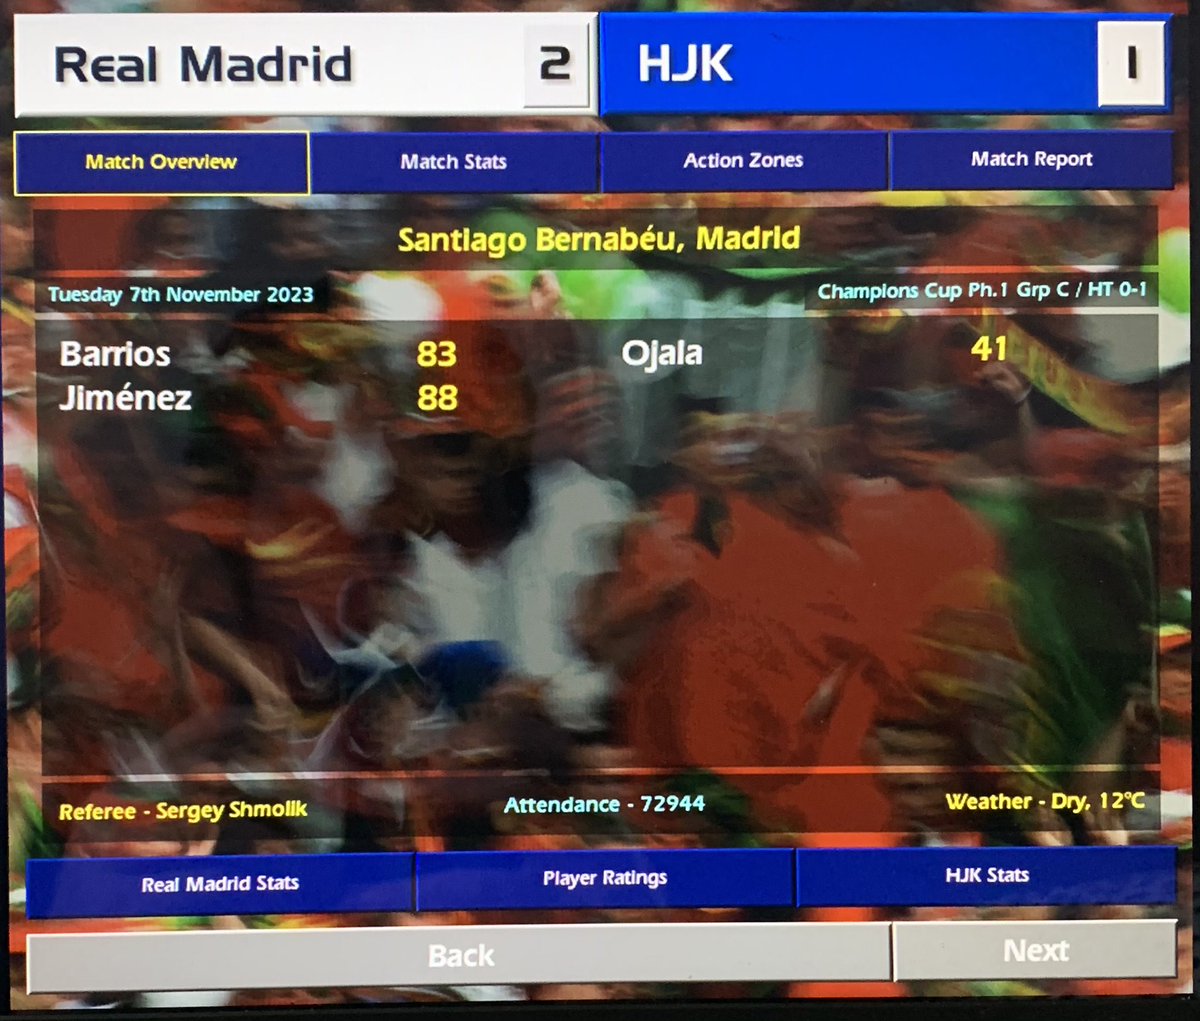 ‘2 late goals ensure we top the group ‘Hey lads, where does Satan wash his hands? In the Helsinki’ I yell post match. No one laughs so I quickly make it clear that was Otto’s joke to begin with’ @champman0102 #cm0102 https://t.co/sohrjZNG4y